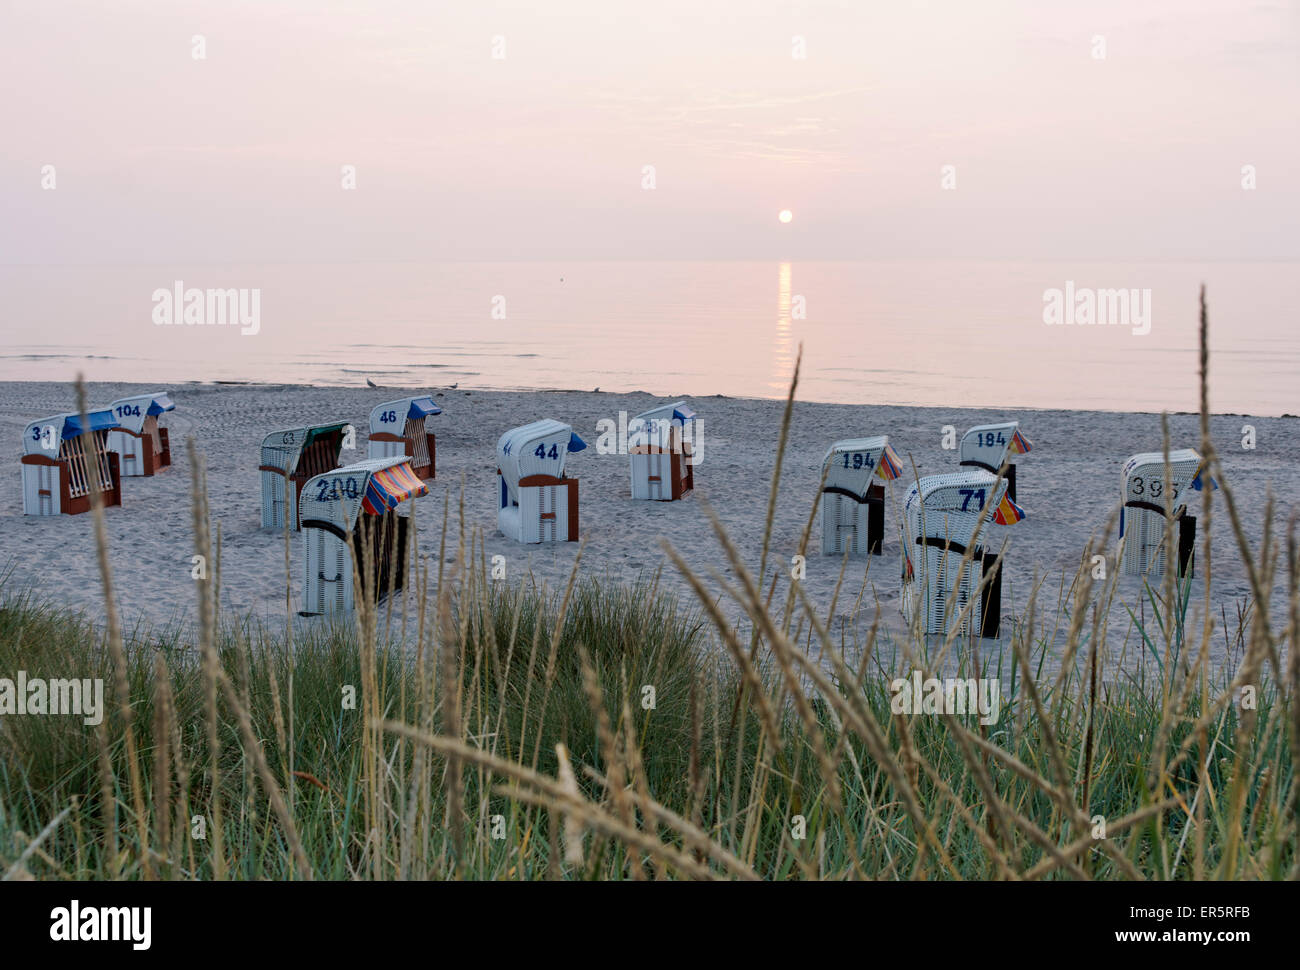 Hooded beach chairs on the beach at sunset, Baltic Sea, Groemitz, Schleswig-Holstein, Germany Stock Photo